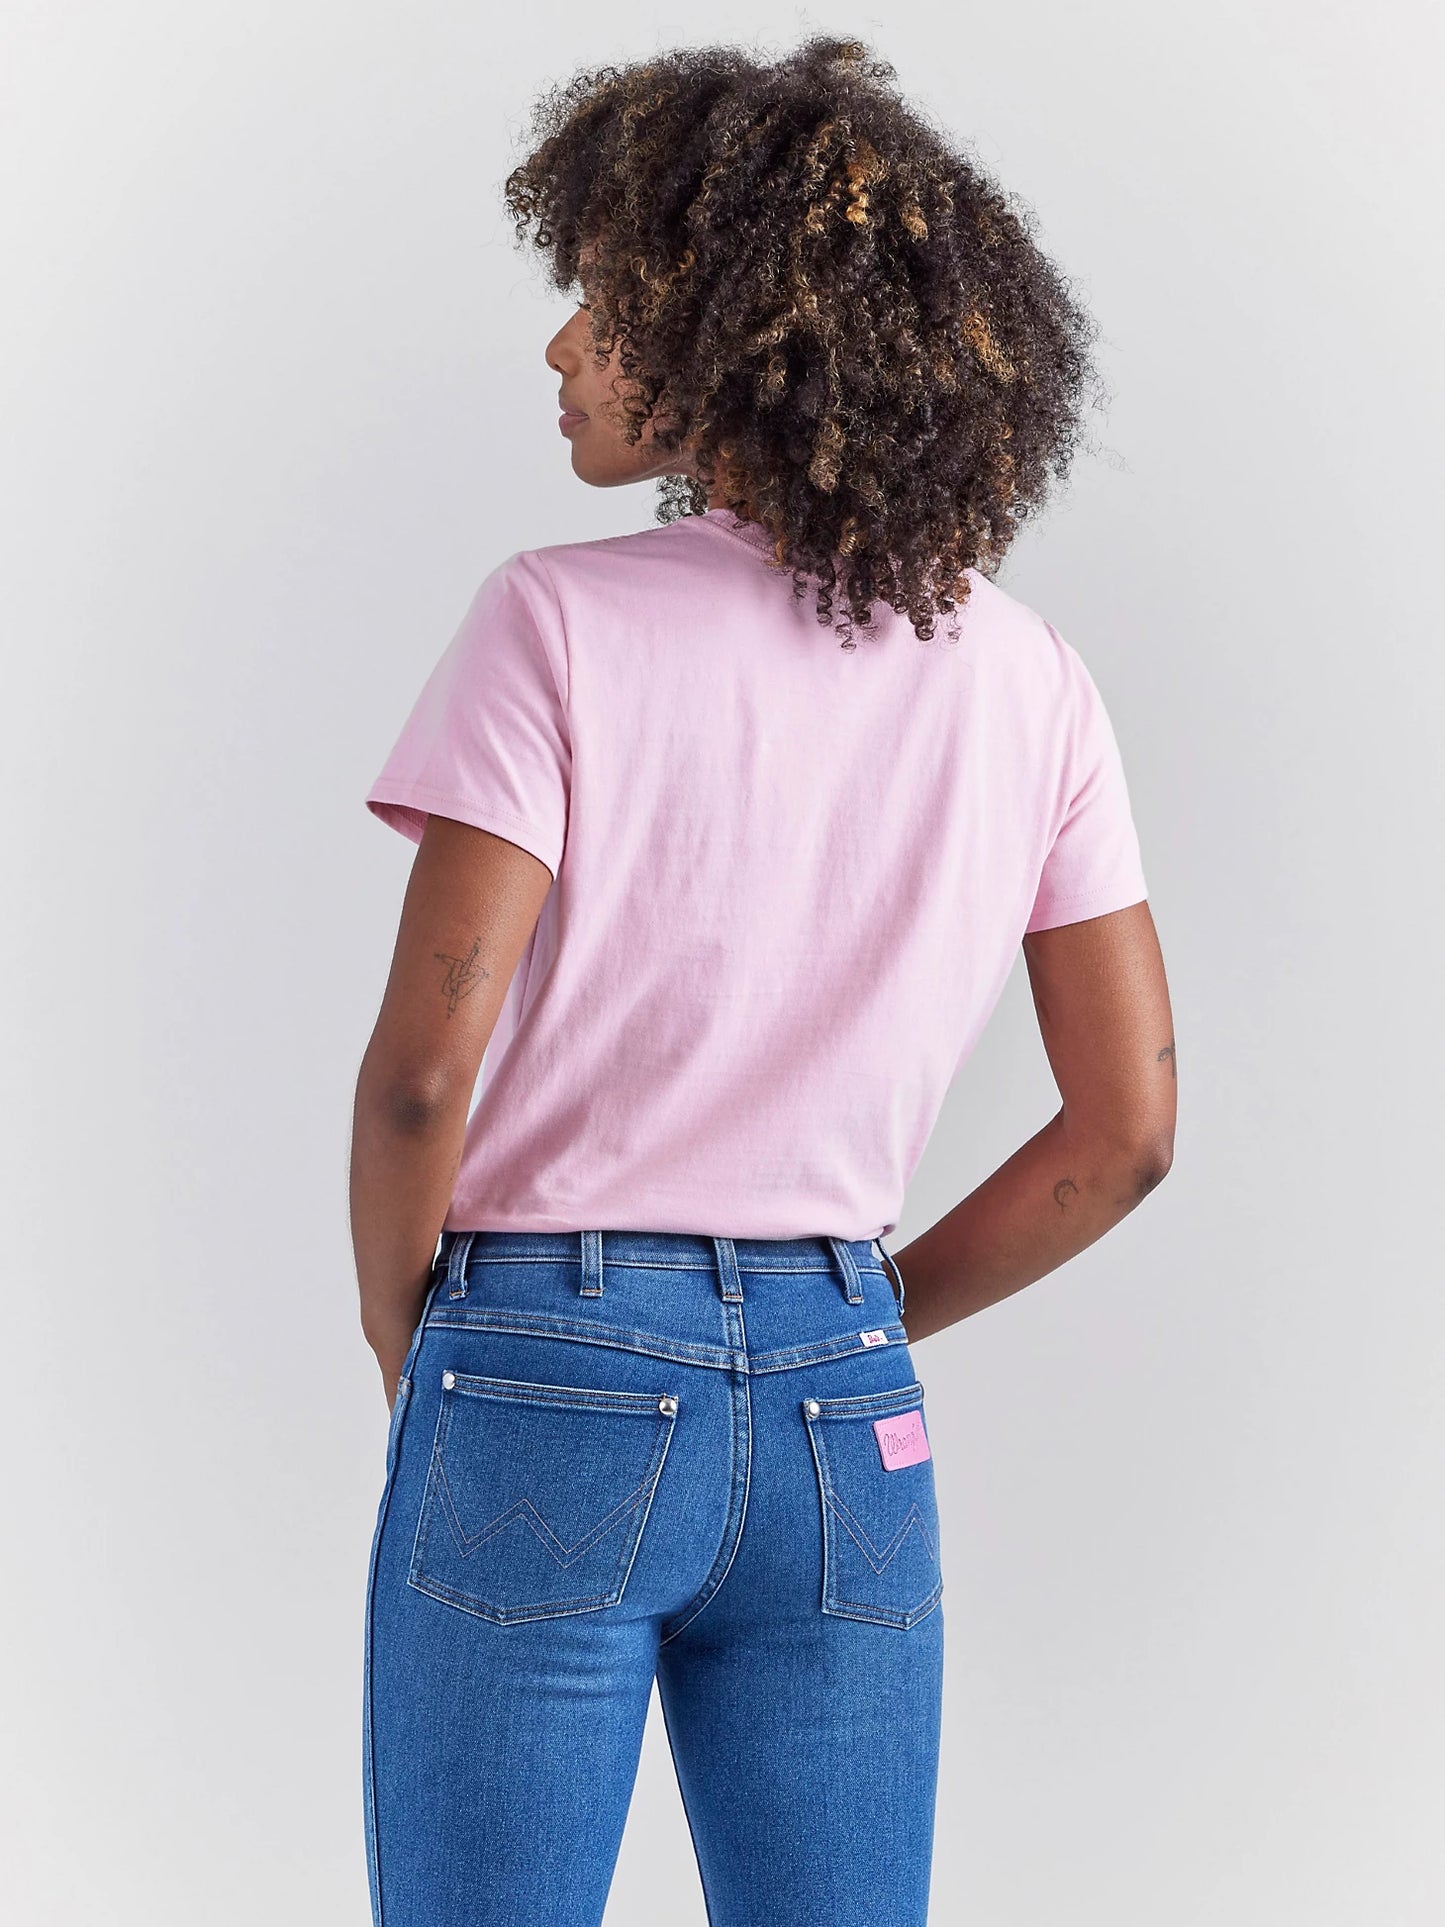 Wrangler X Barbie: Cowgirl Graphic Tee in Positive Pink